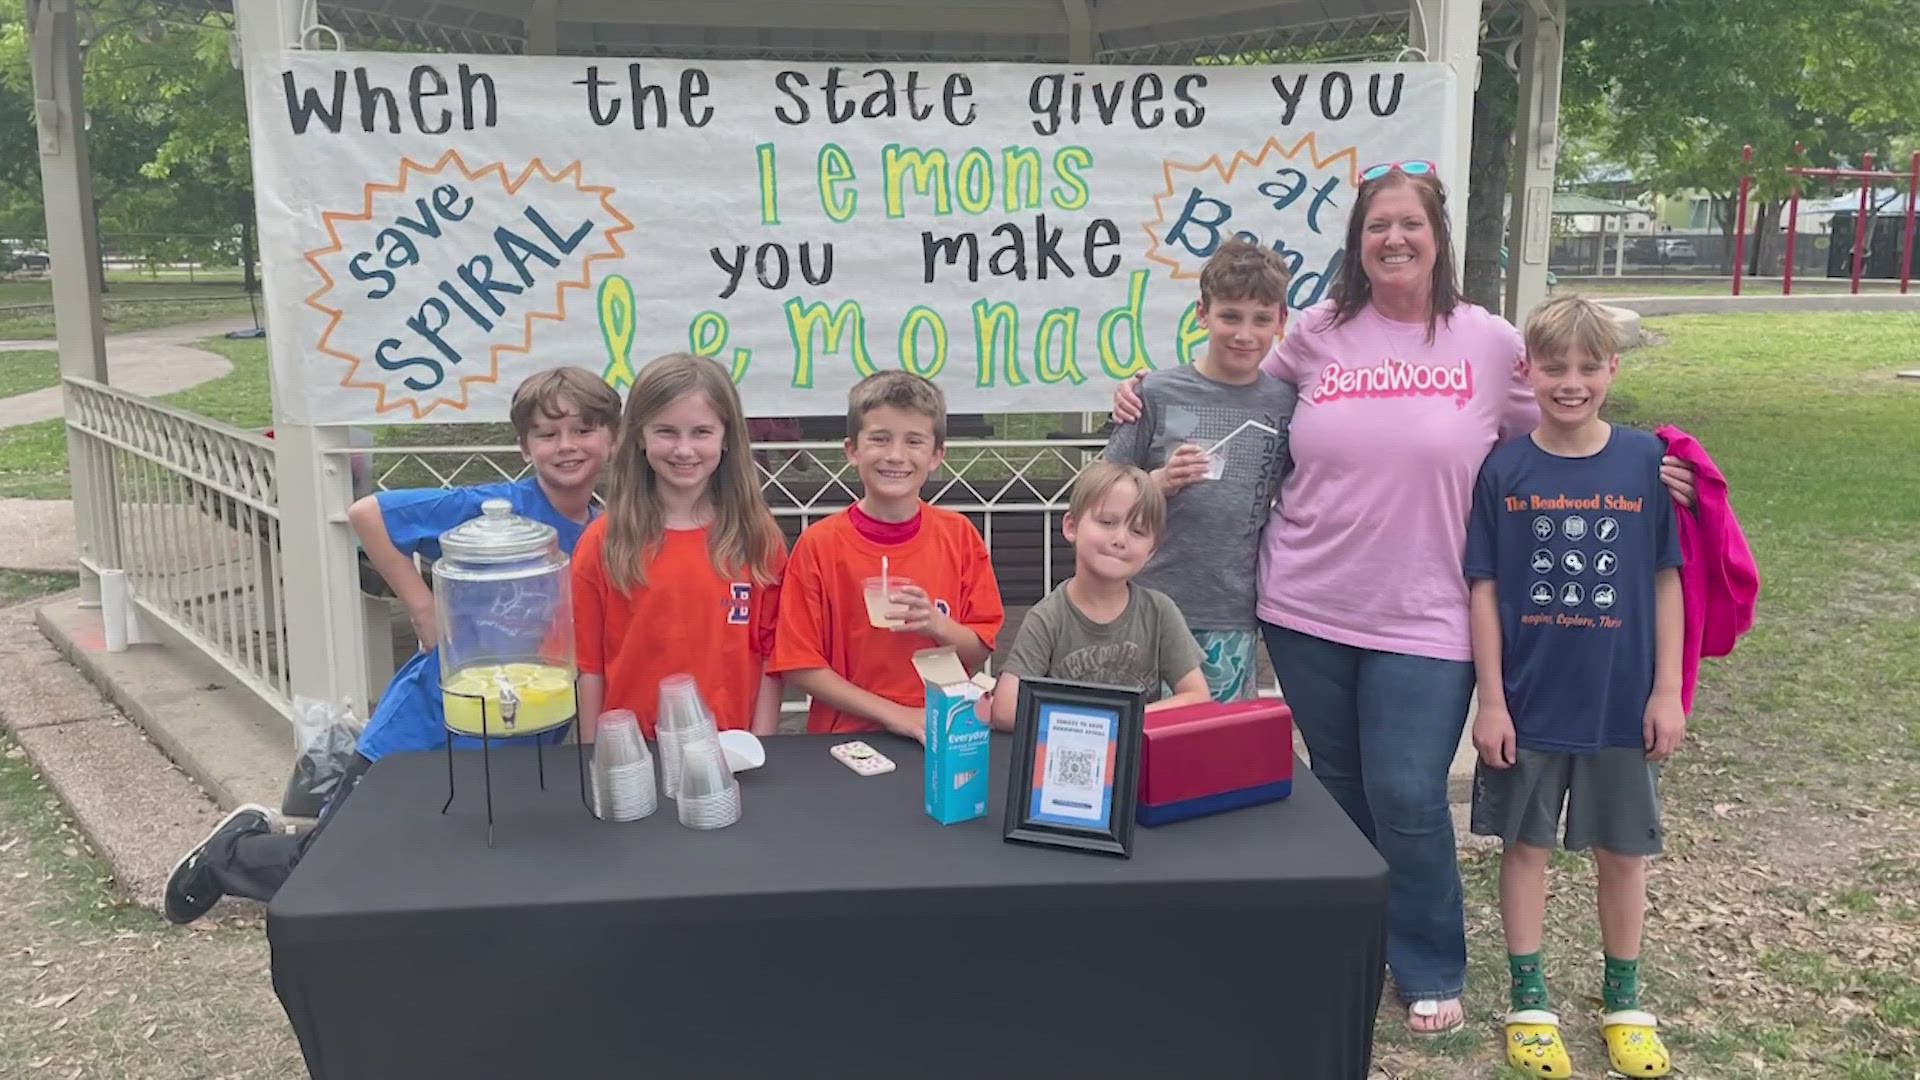 The Spring Branch ISD PTA president said the community was able to secure donations for the SPIRAL program, which helps gifted children across the district.